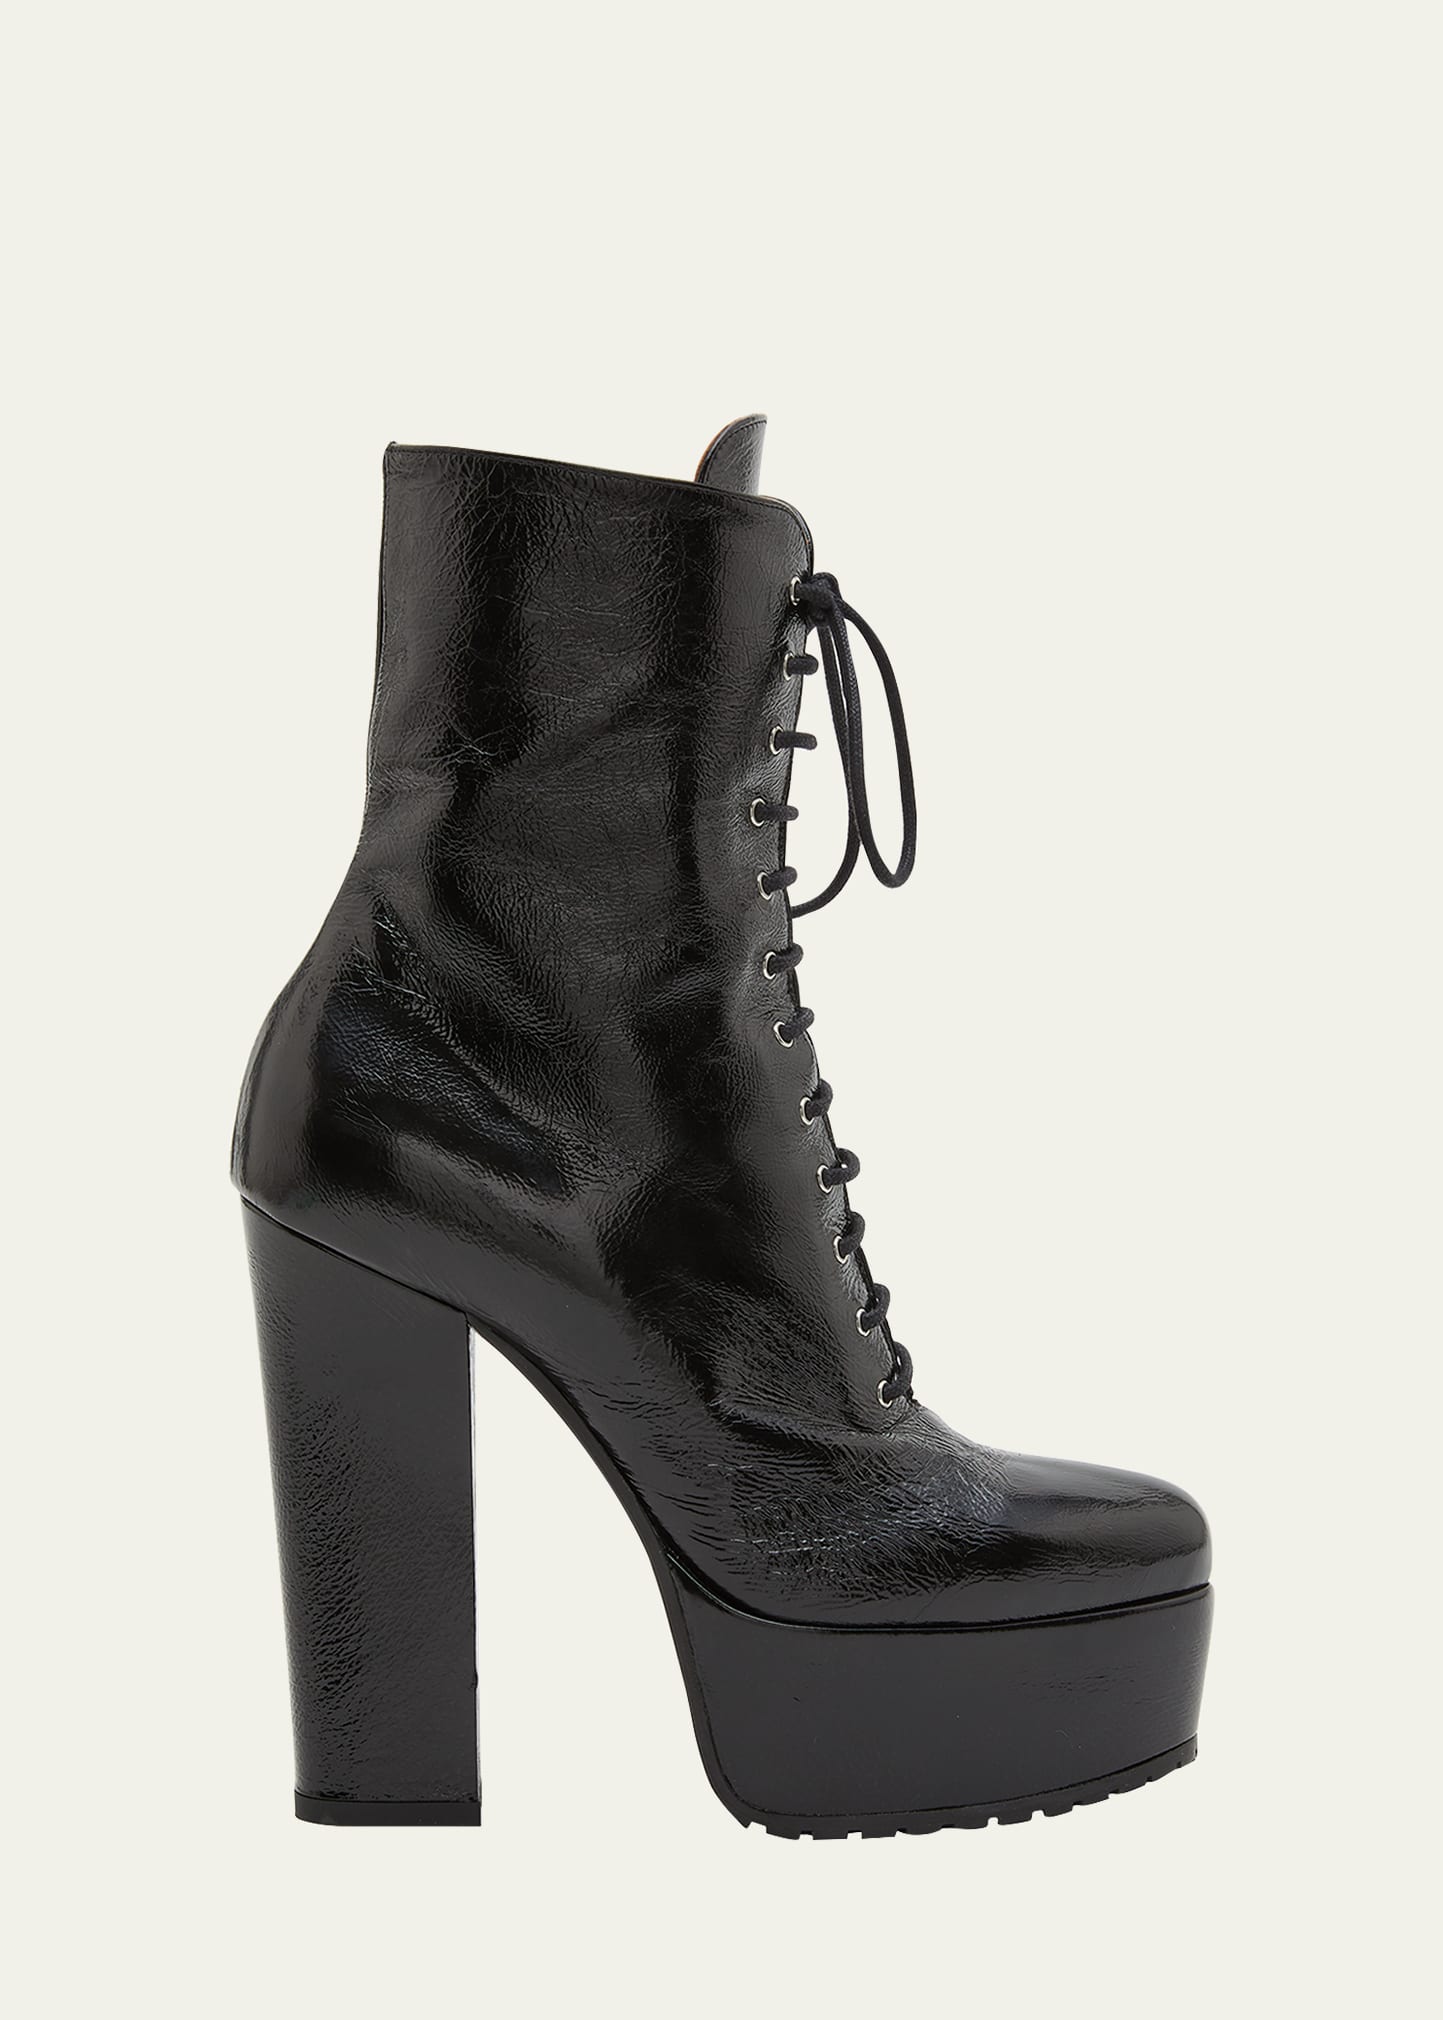 ALAIA Cutout Leather Buckle Ankle Boots - Bergdorf Goodman